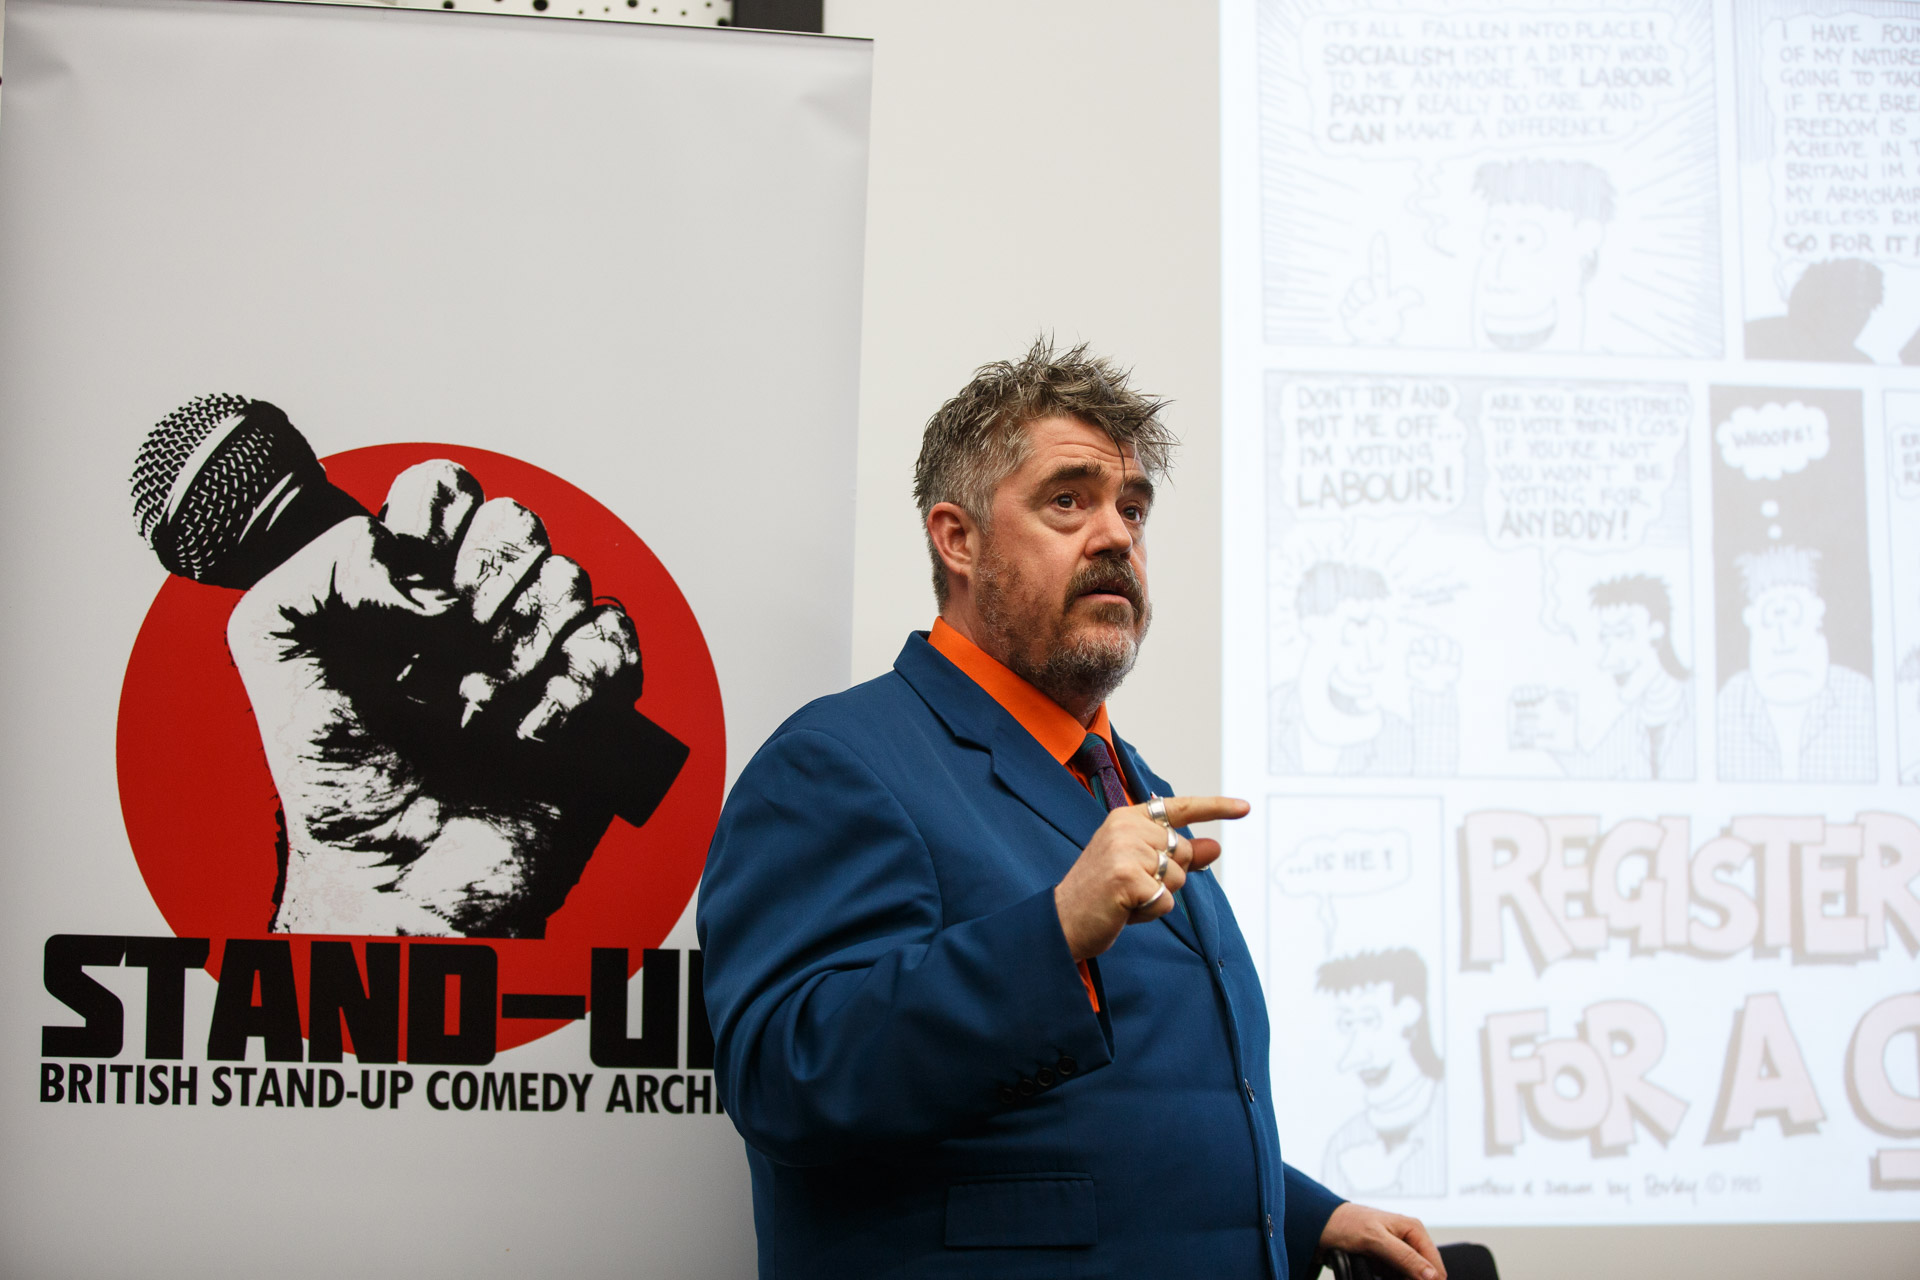 Phill Jupitus talking about a Red Wedge Comedy leaflet which cartooned for (as Porky the Poet). Photo Matt Wilson